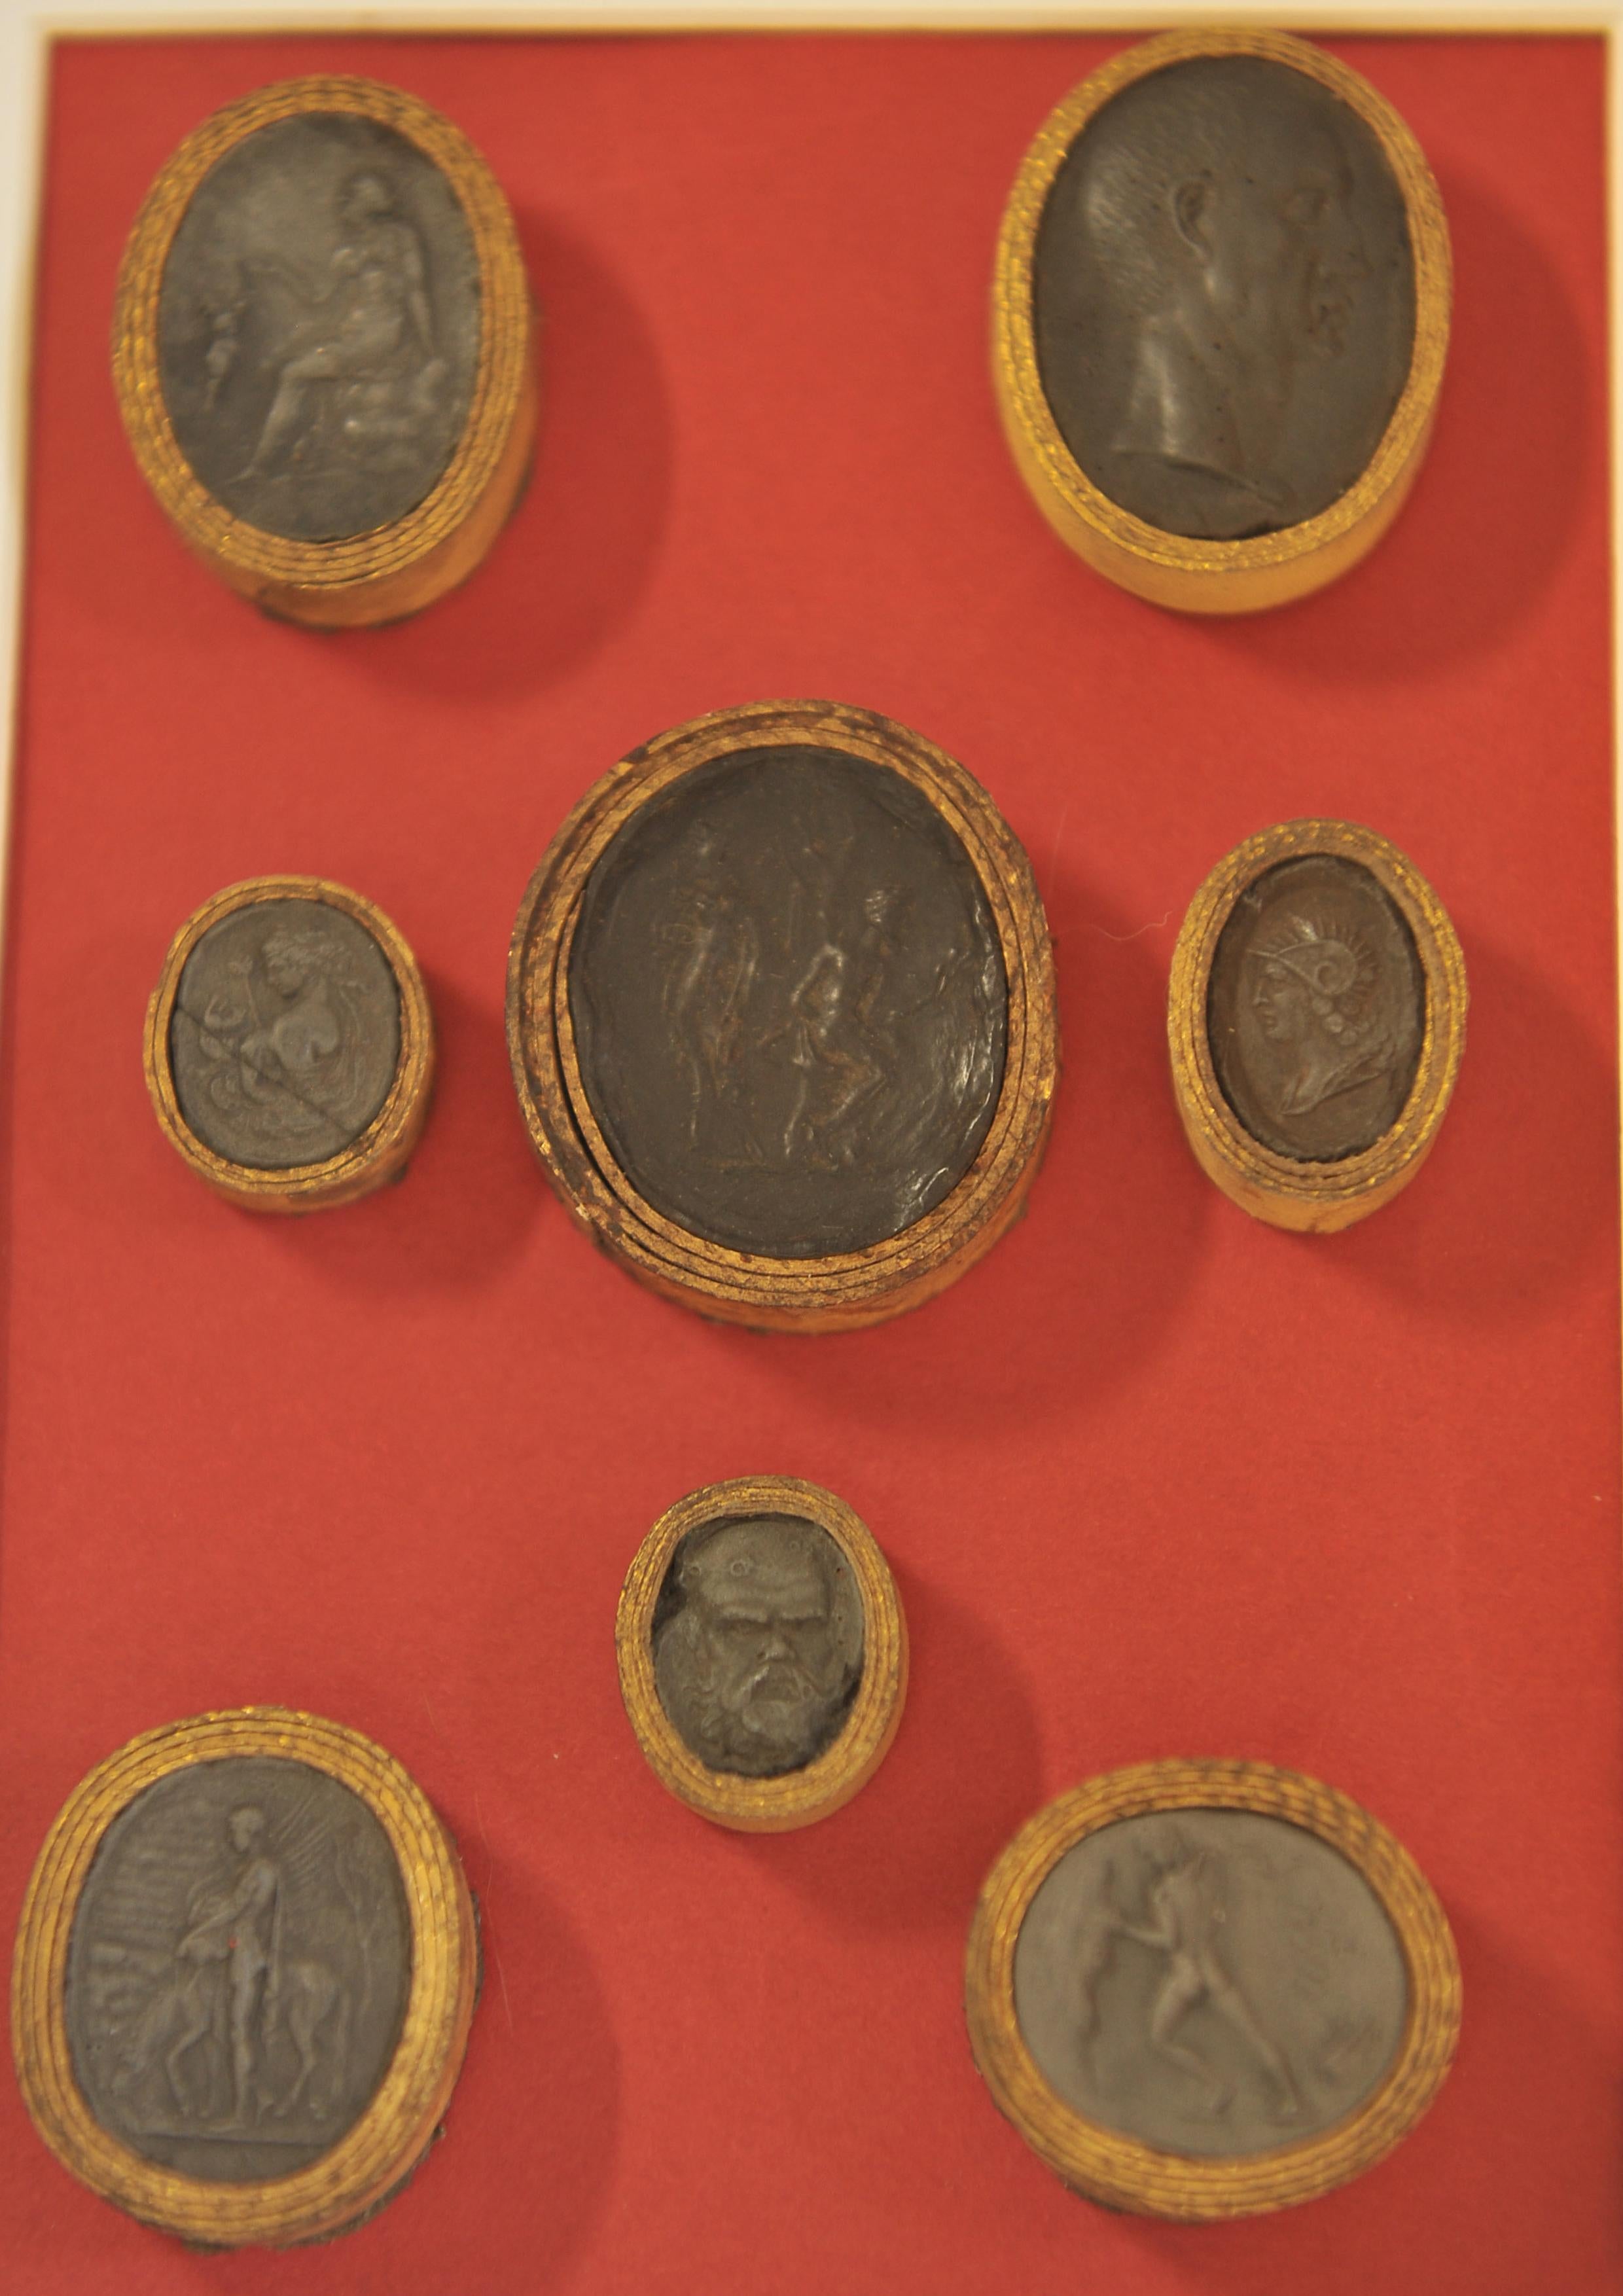 A Small Set of 8 Renaissance Classical Grand Tour Medallions.
Possibly Have Been Put on A Modern Backing At Some Point 
Grand Tour Cameos Intaglio date back to the 18th and 19th century – before photography, when they were introduced for wealthy